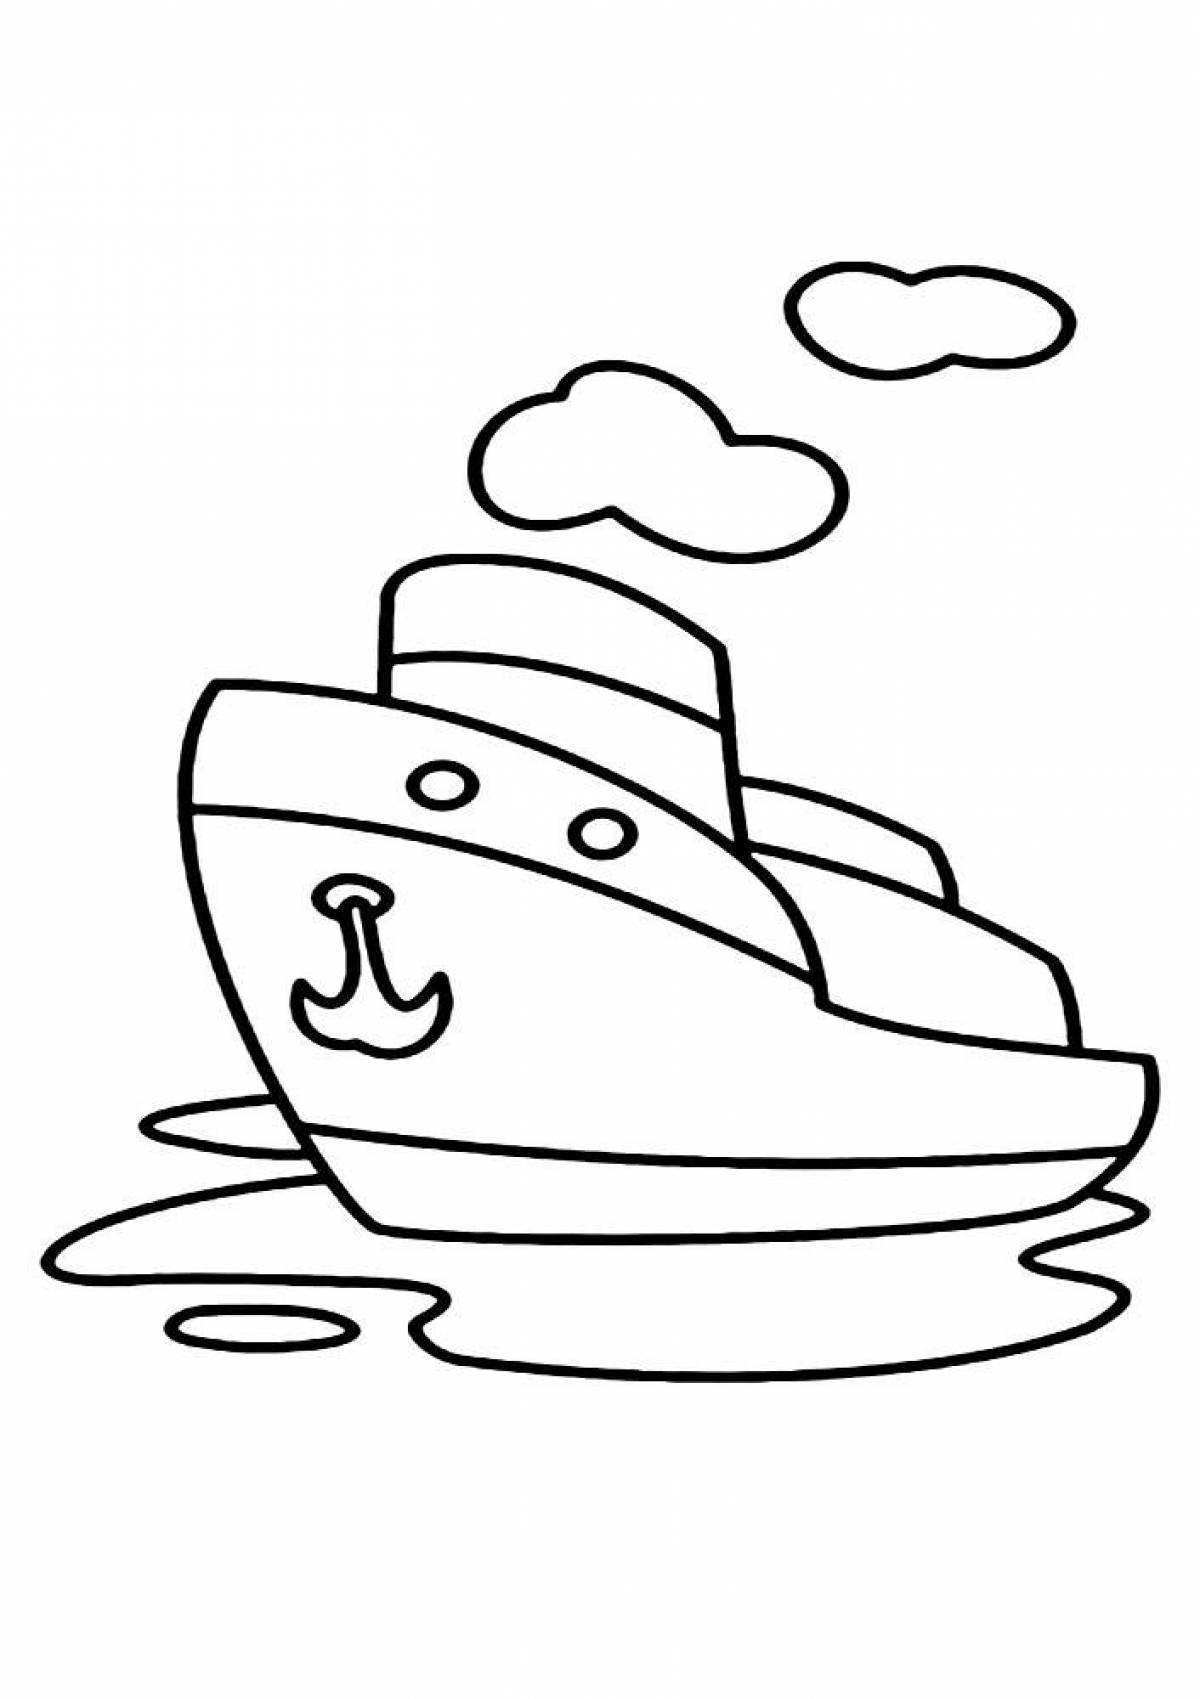 Shining boat coloring page